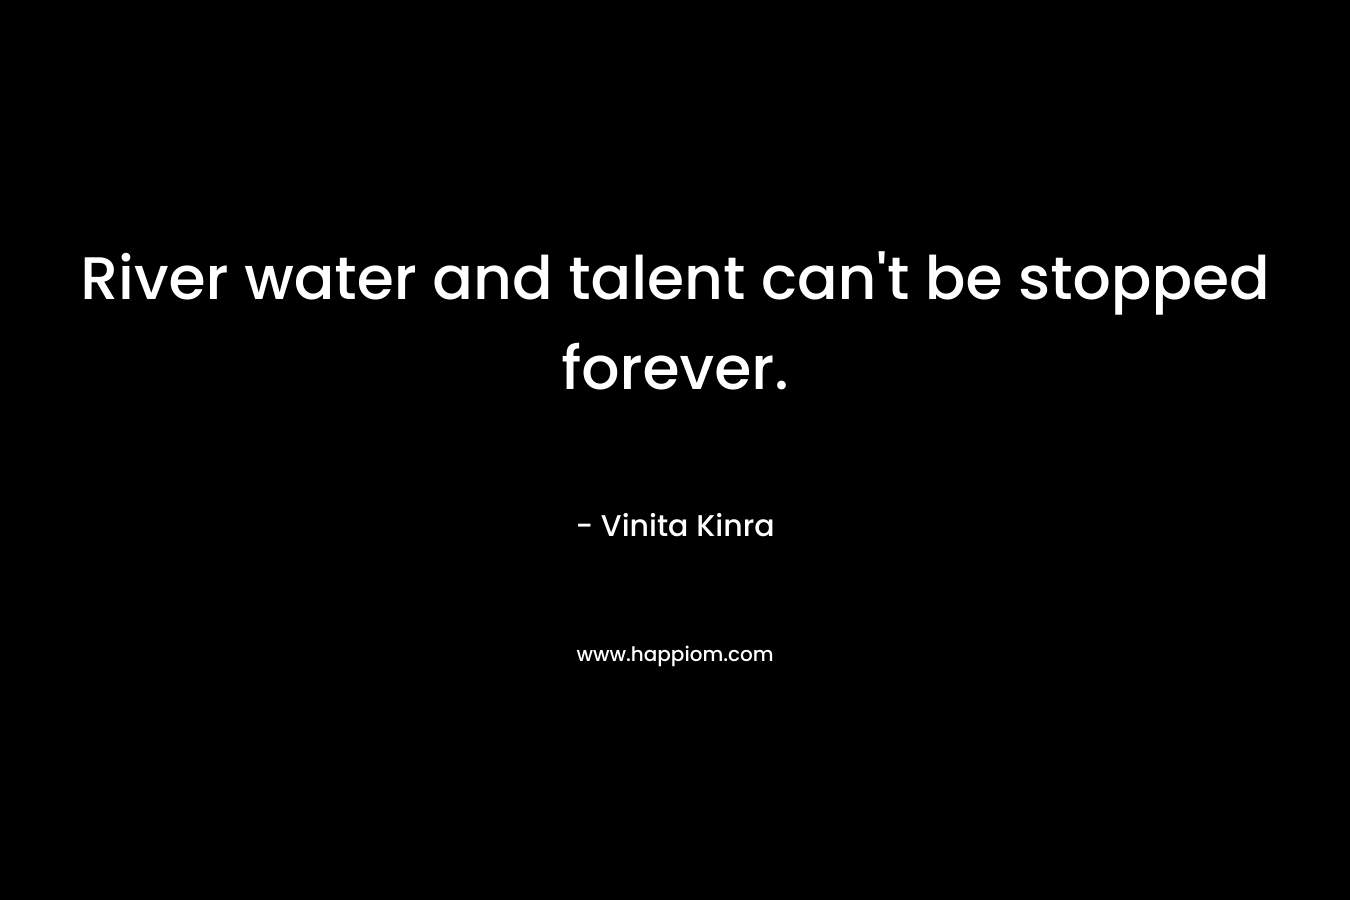 River water and talent can’t be stopped forever. – Vinita Kinra